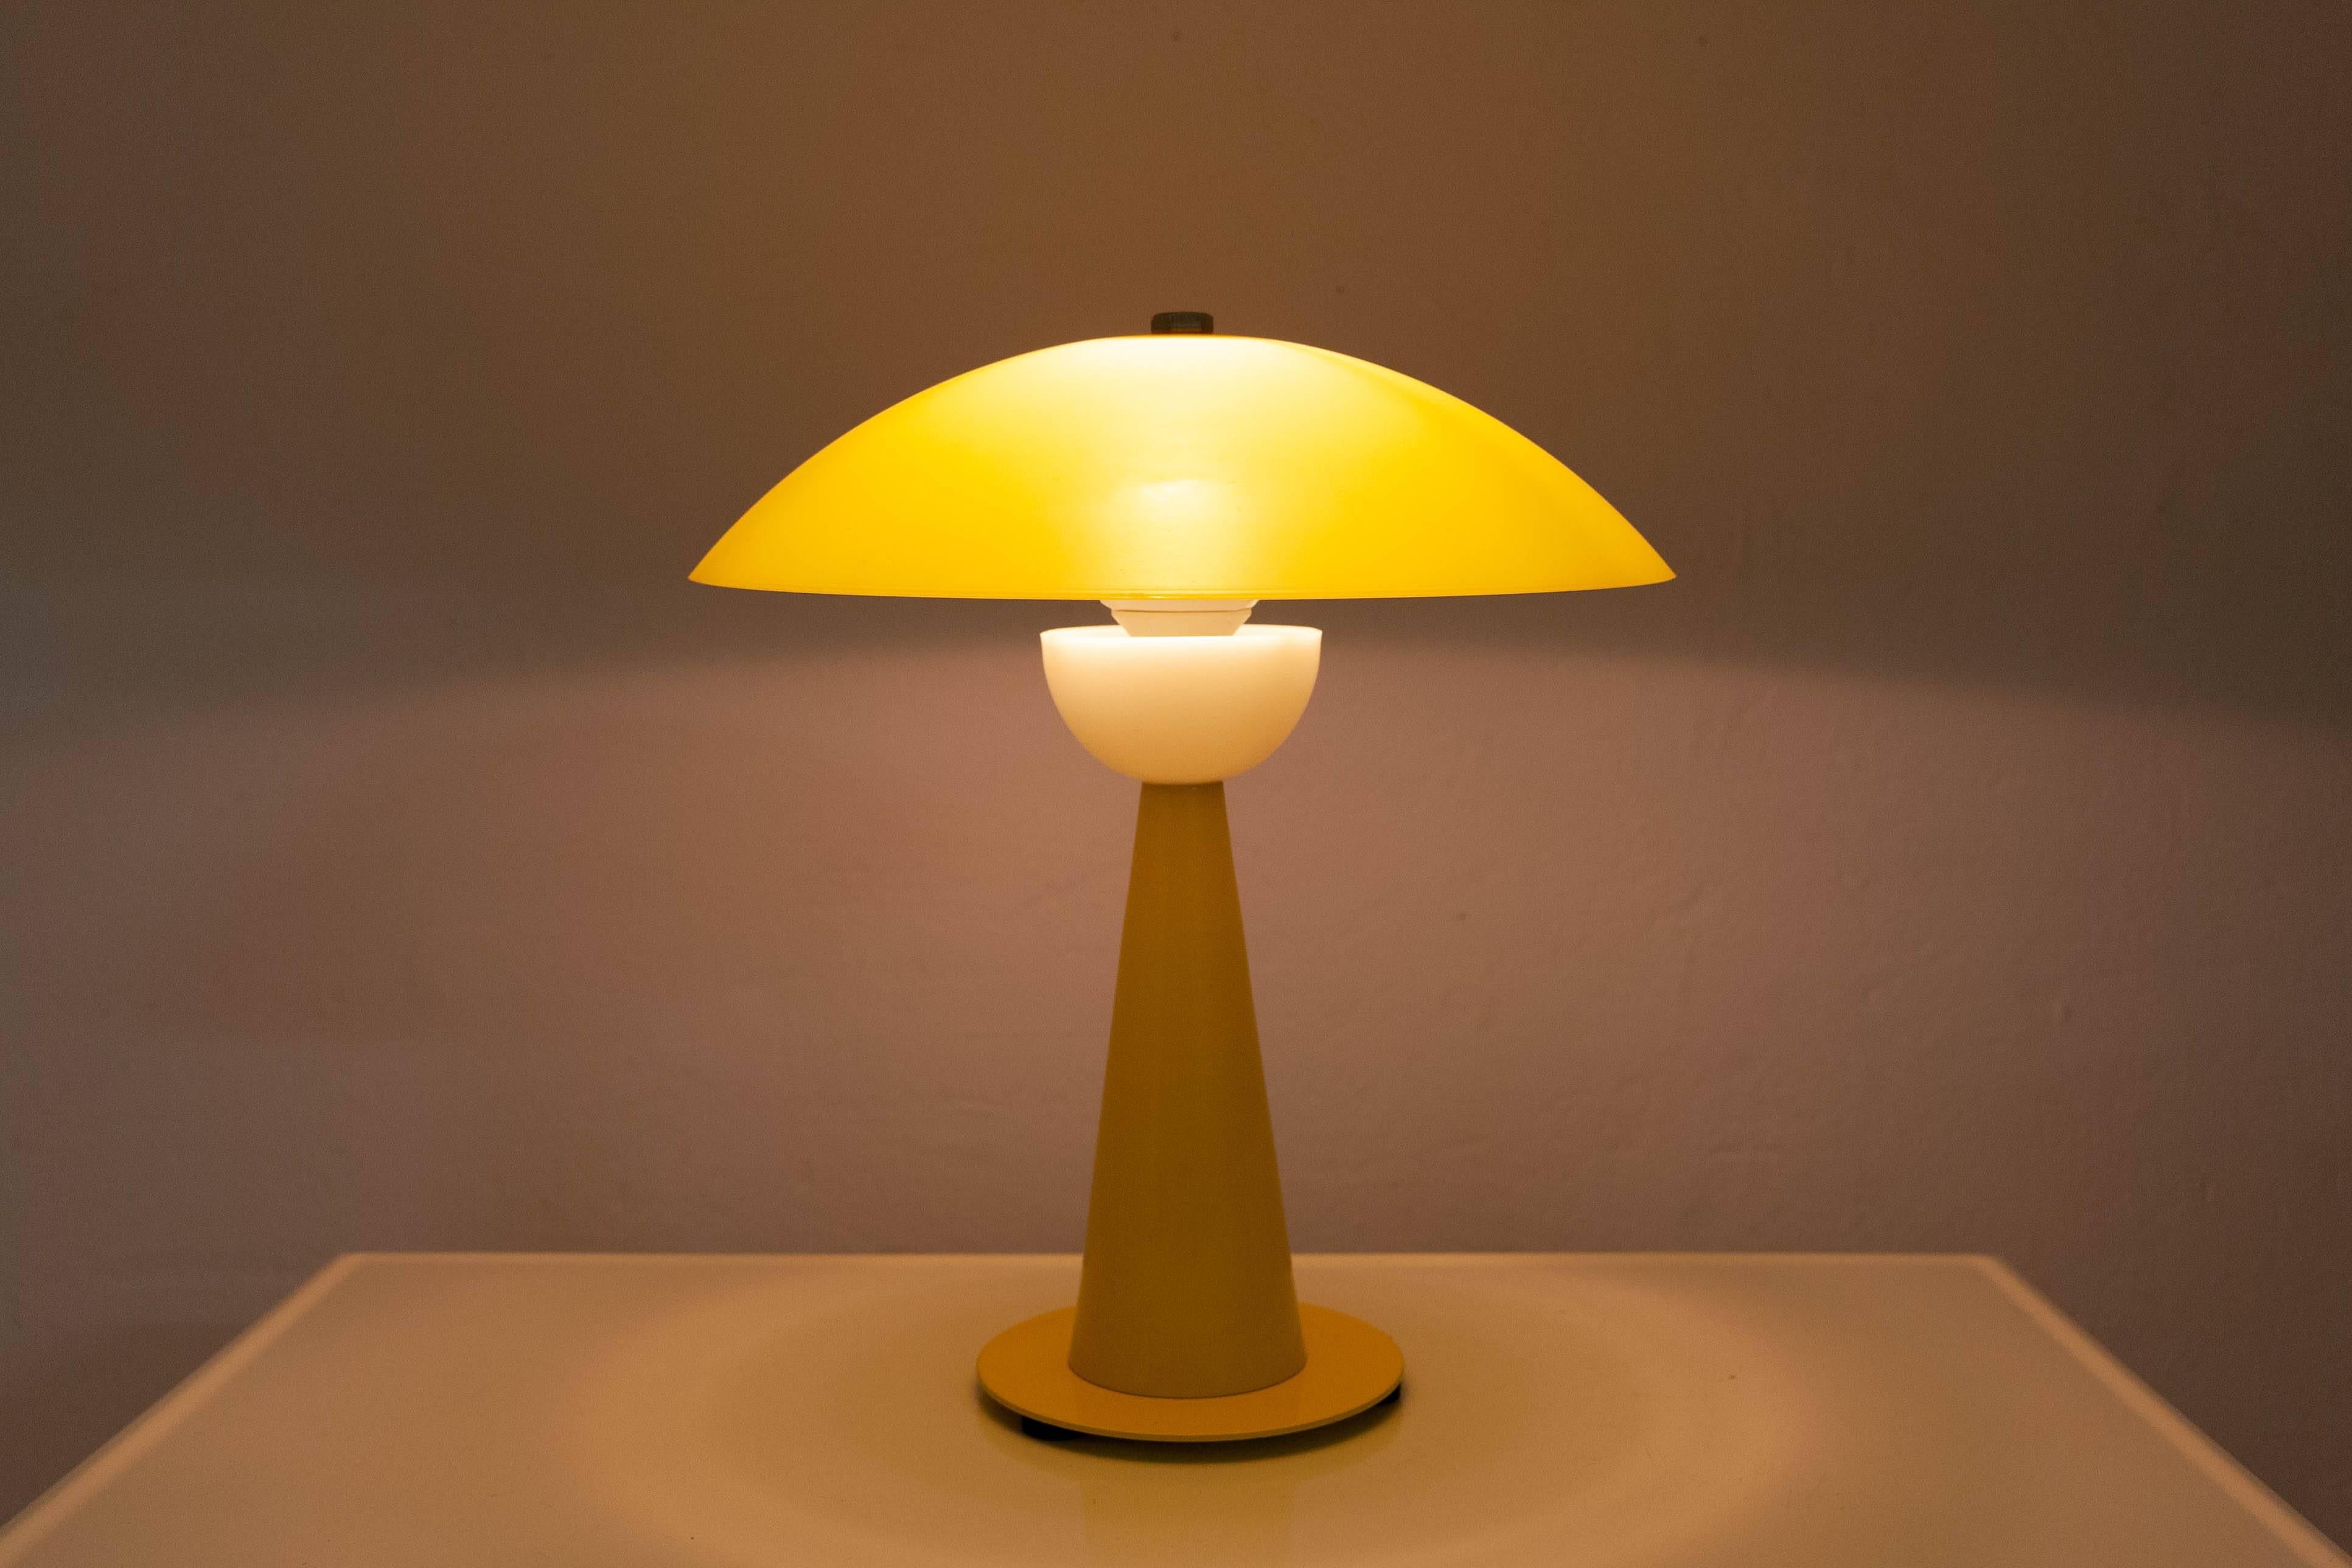 Charming little table lamp by Aluminor France in an eye-catching bright yellow finish.